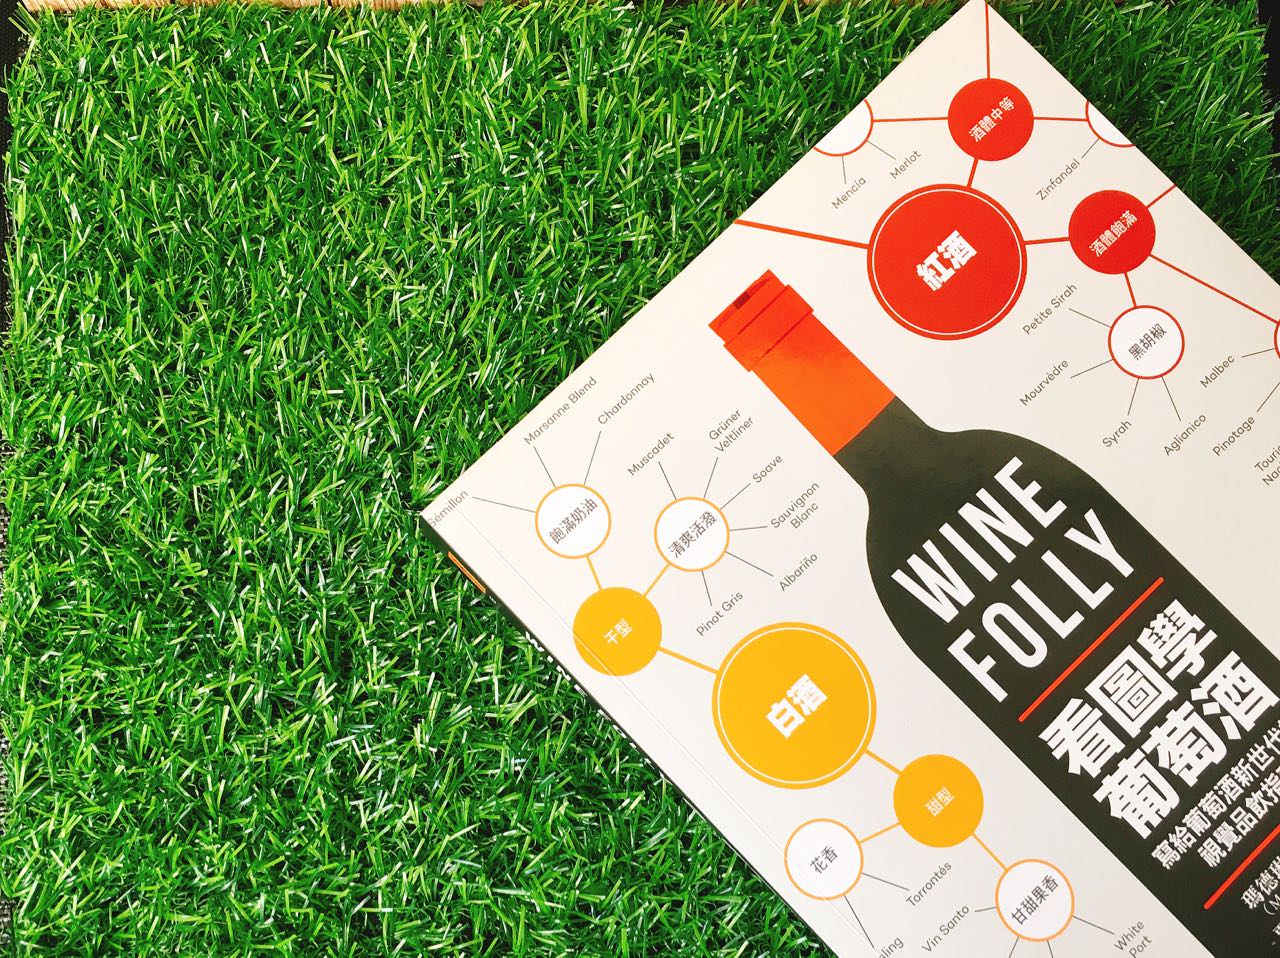 WINE FOLLY Book Review 》看圖學葡萄酒